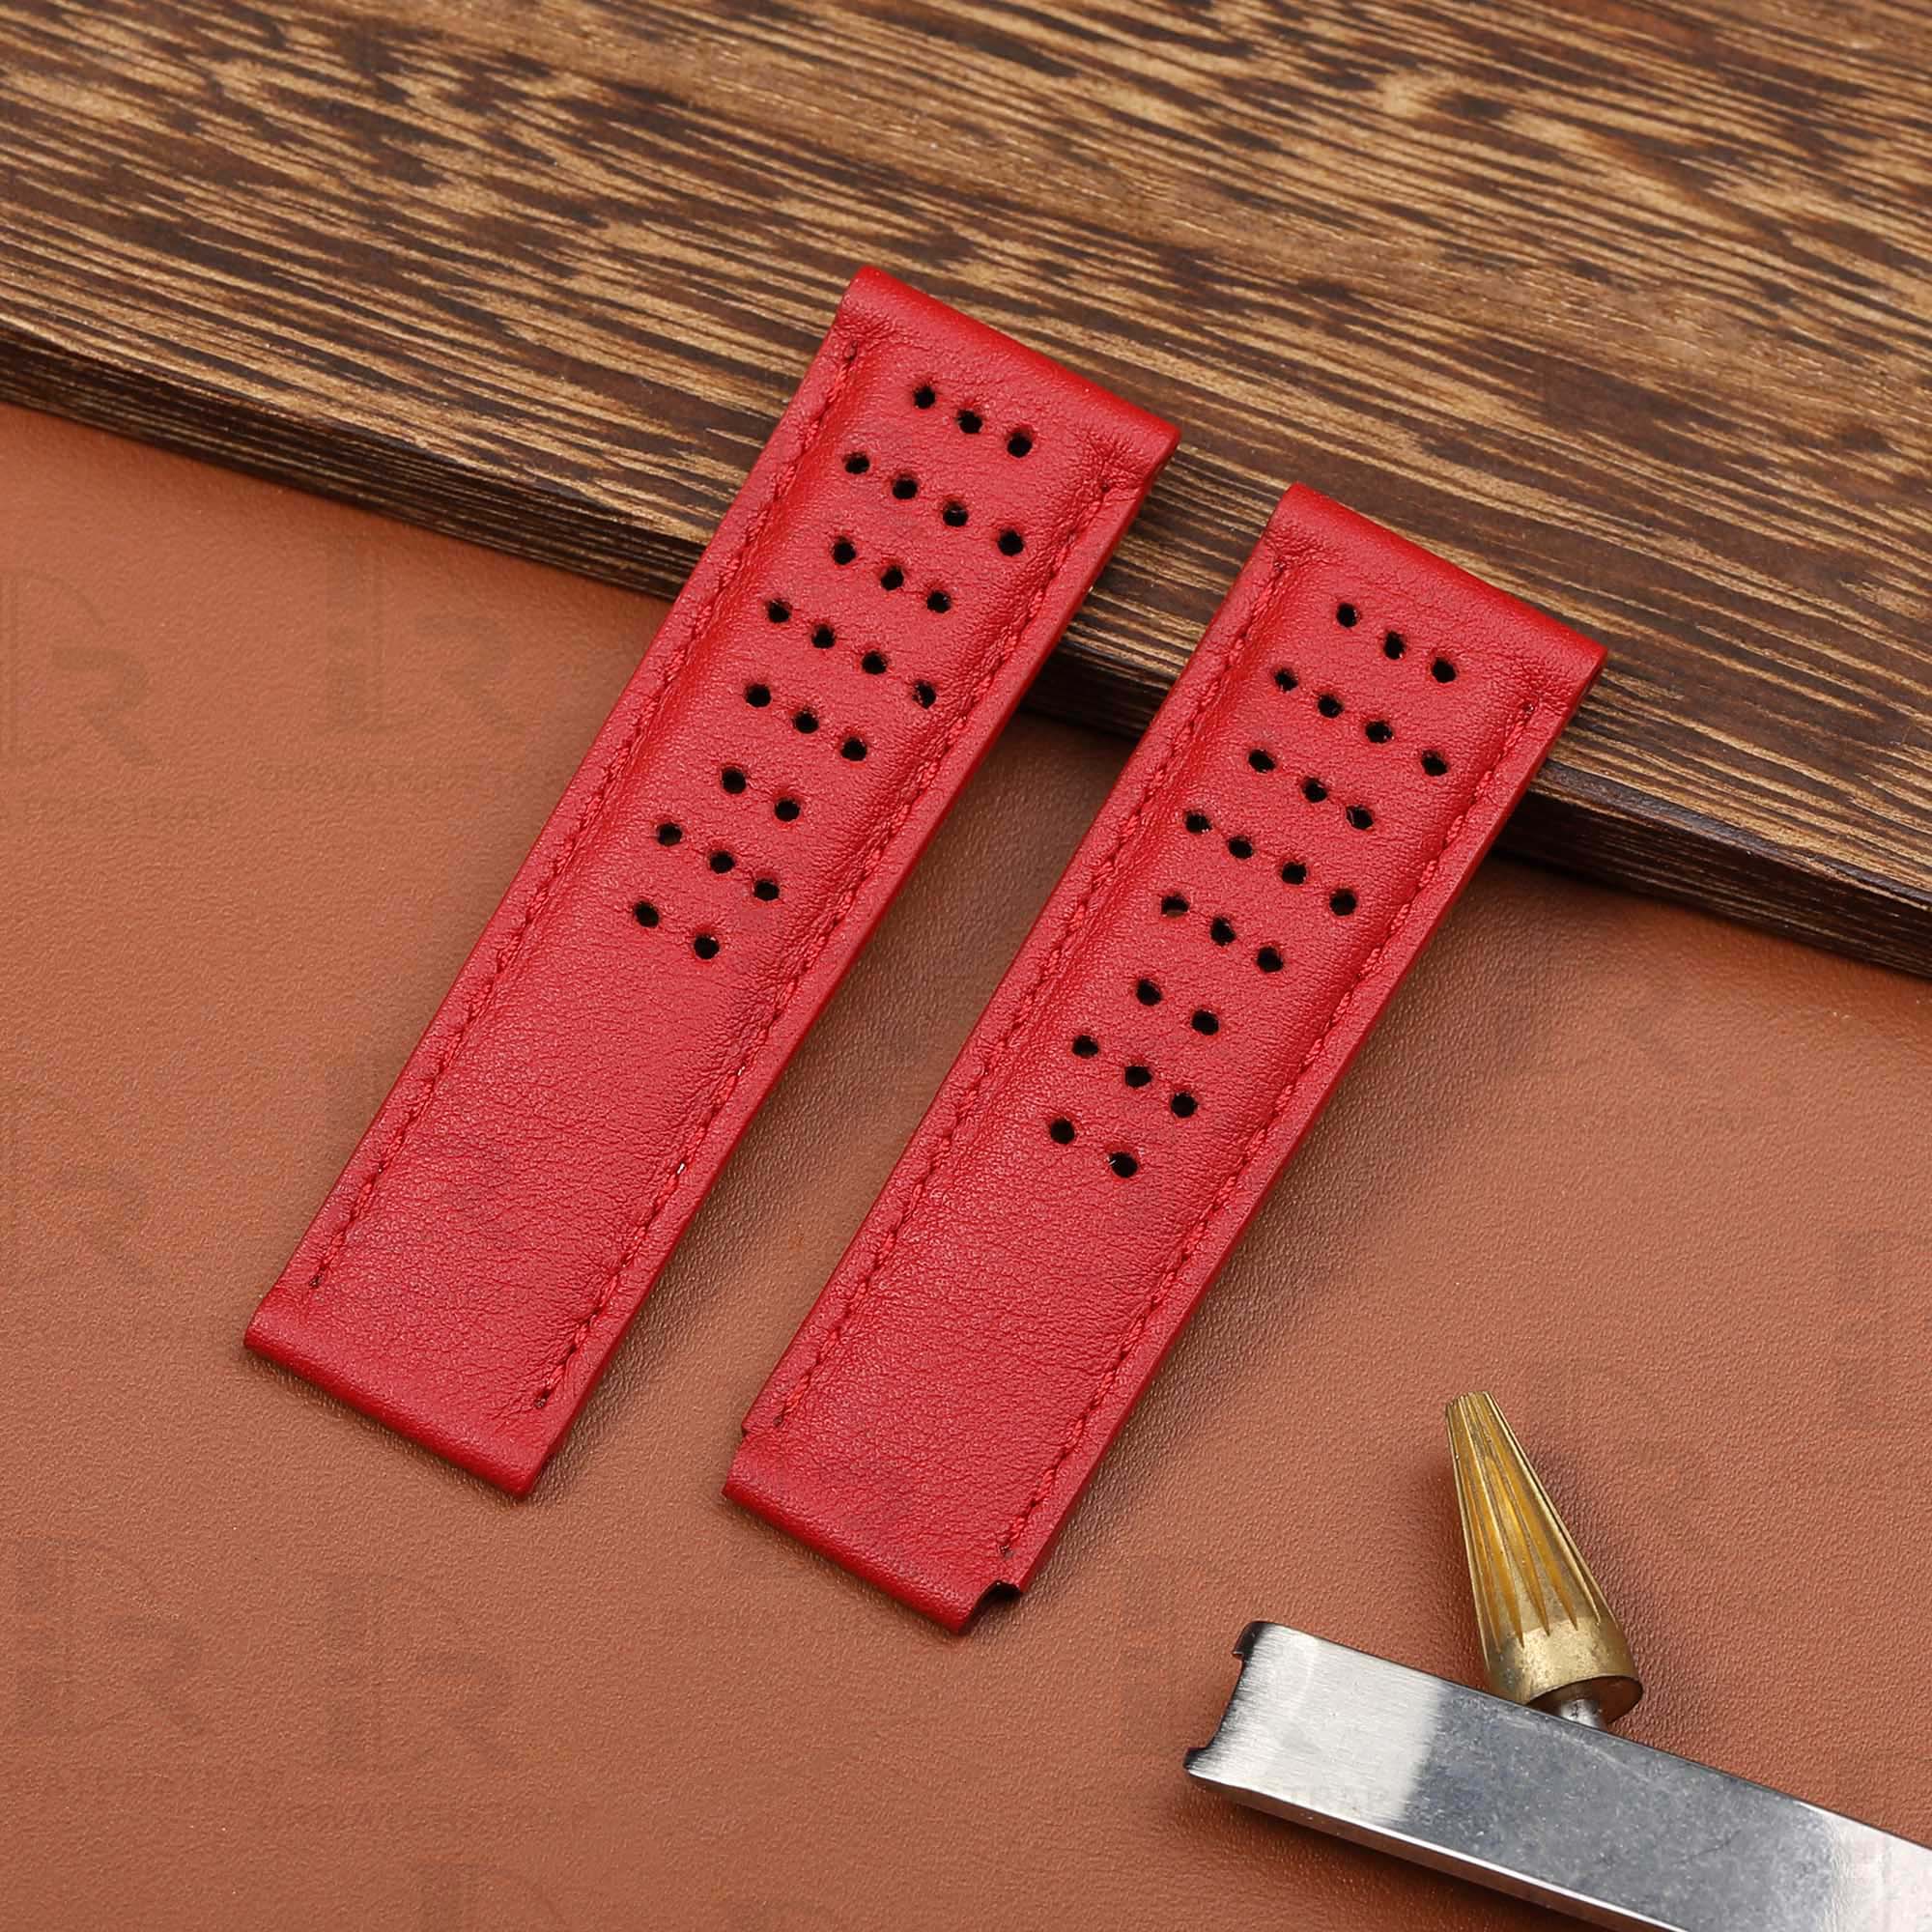 Custom Seiko 5 sports 55th anniversary ultraseven limited edition Red leather strap 20mm replacement watch band